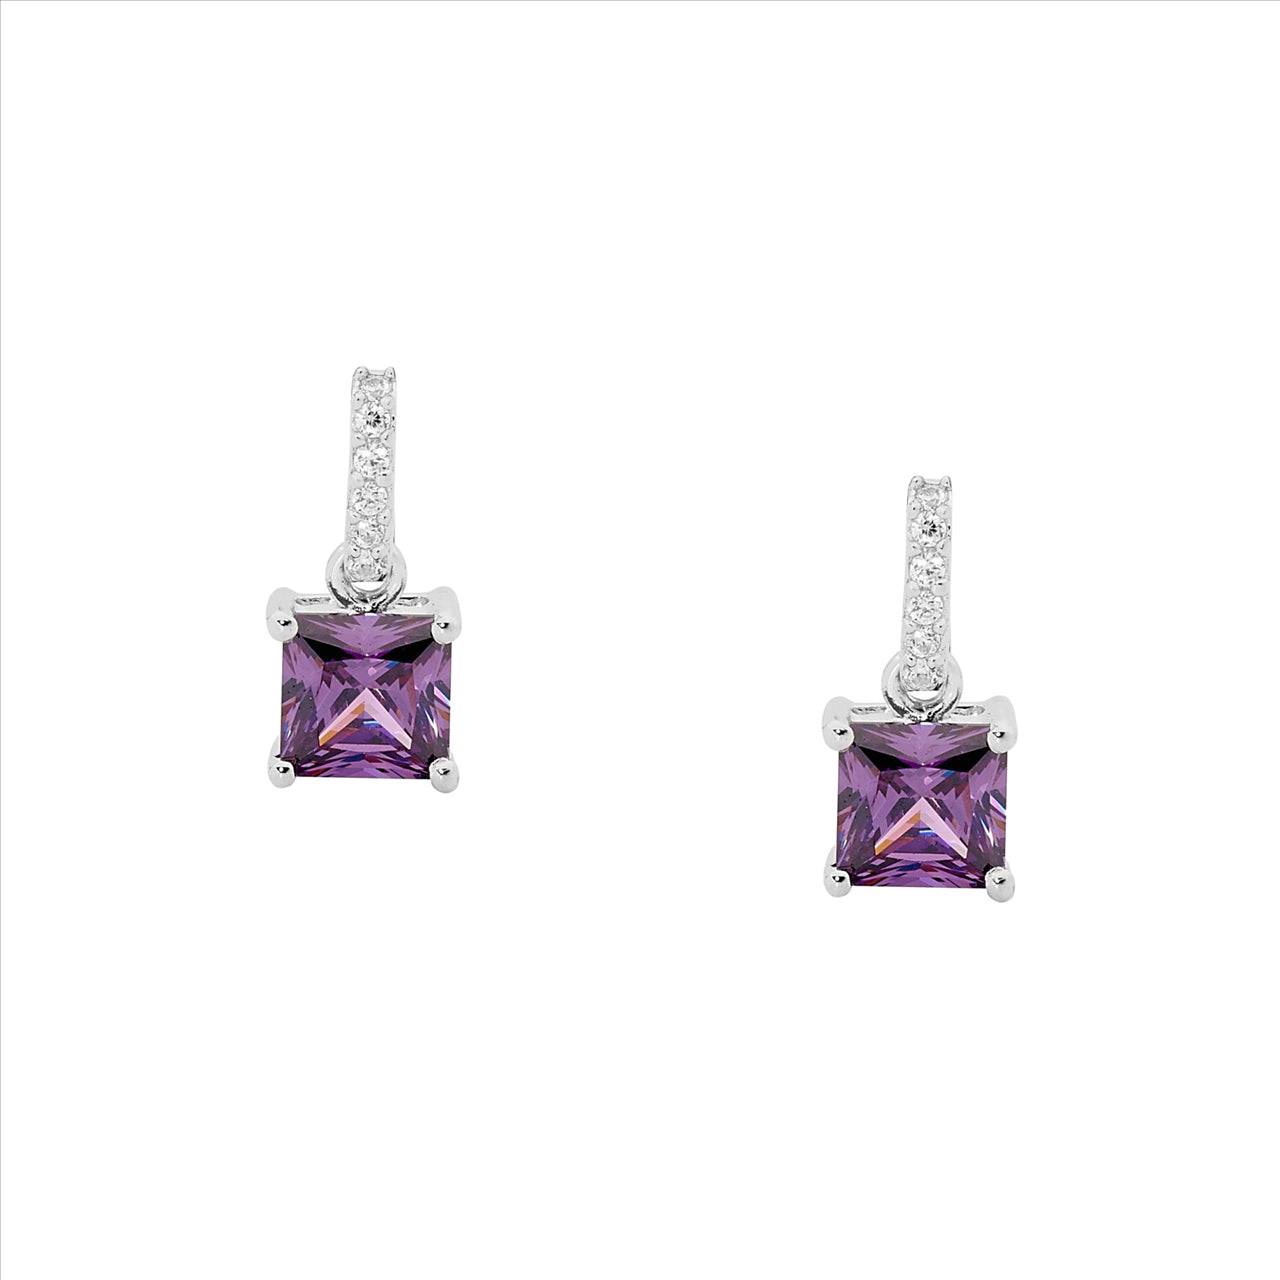 Sterling Silver Drop Earrings with Amethyst Colour Cubic Zirconias and White CZ Surround